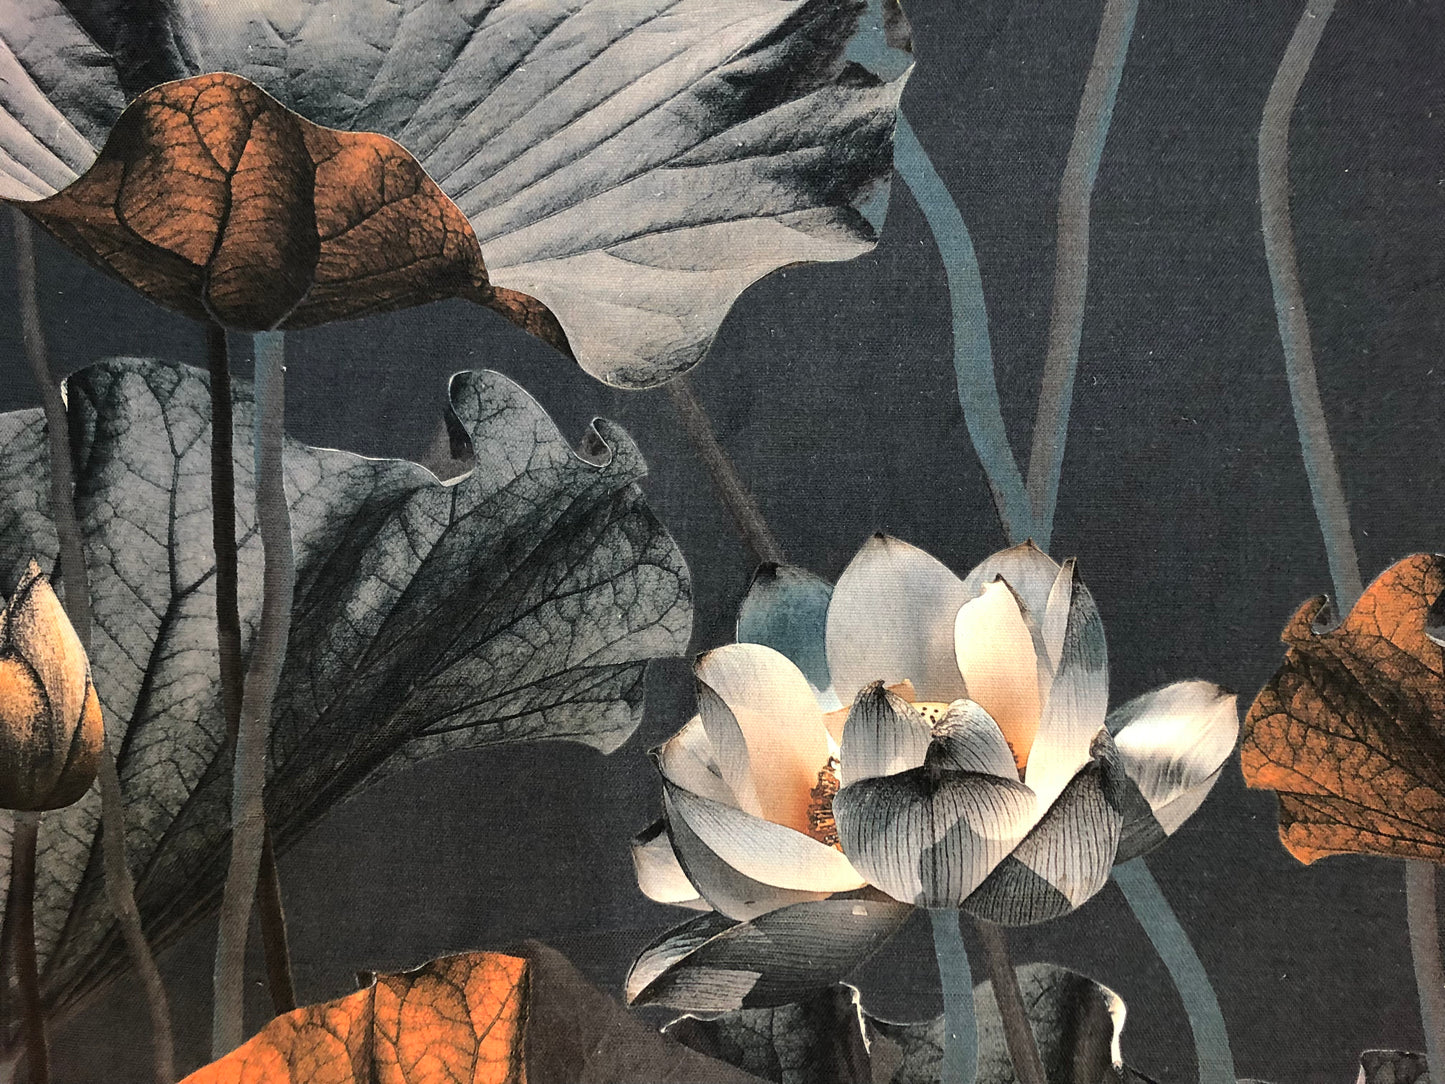 MS CHIEF DESIGNS Lotus Morning in Linen